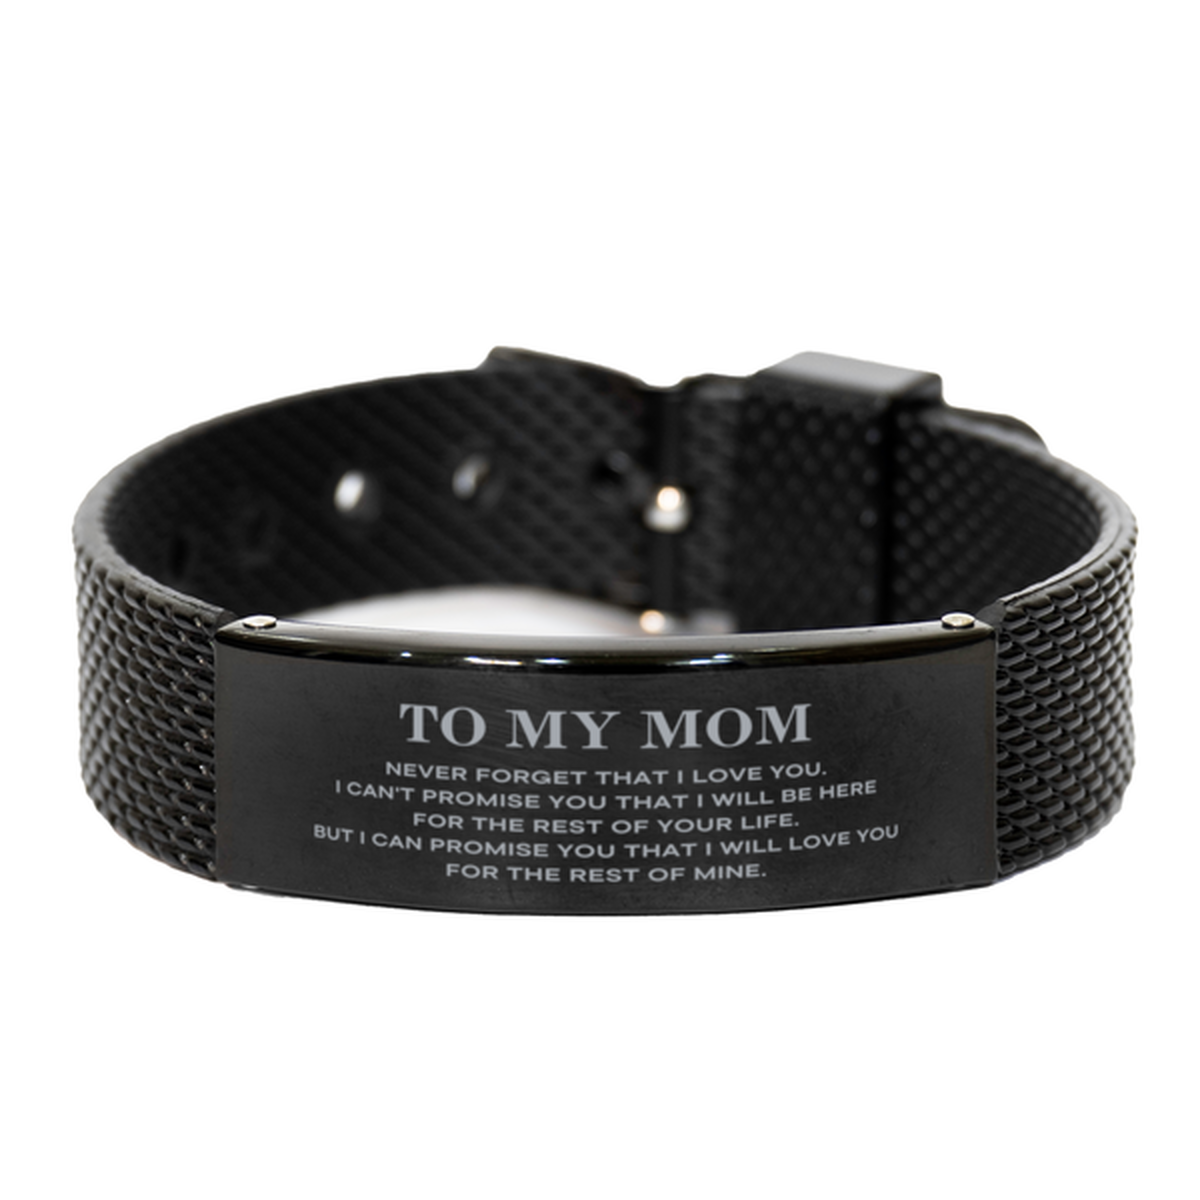 To My Mom Gifts, I will love you for the rest of mine, Love Mom Bracelet, Birthday Christmas Unique Black Shark Mesh Bracelet For Mom